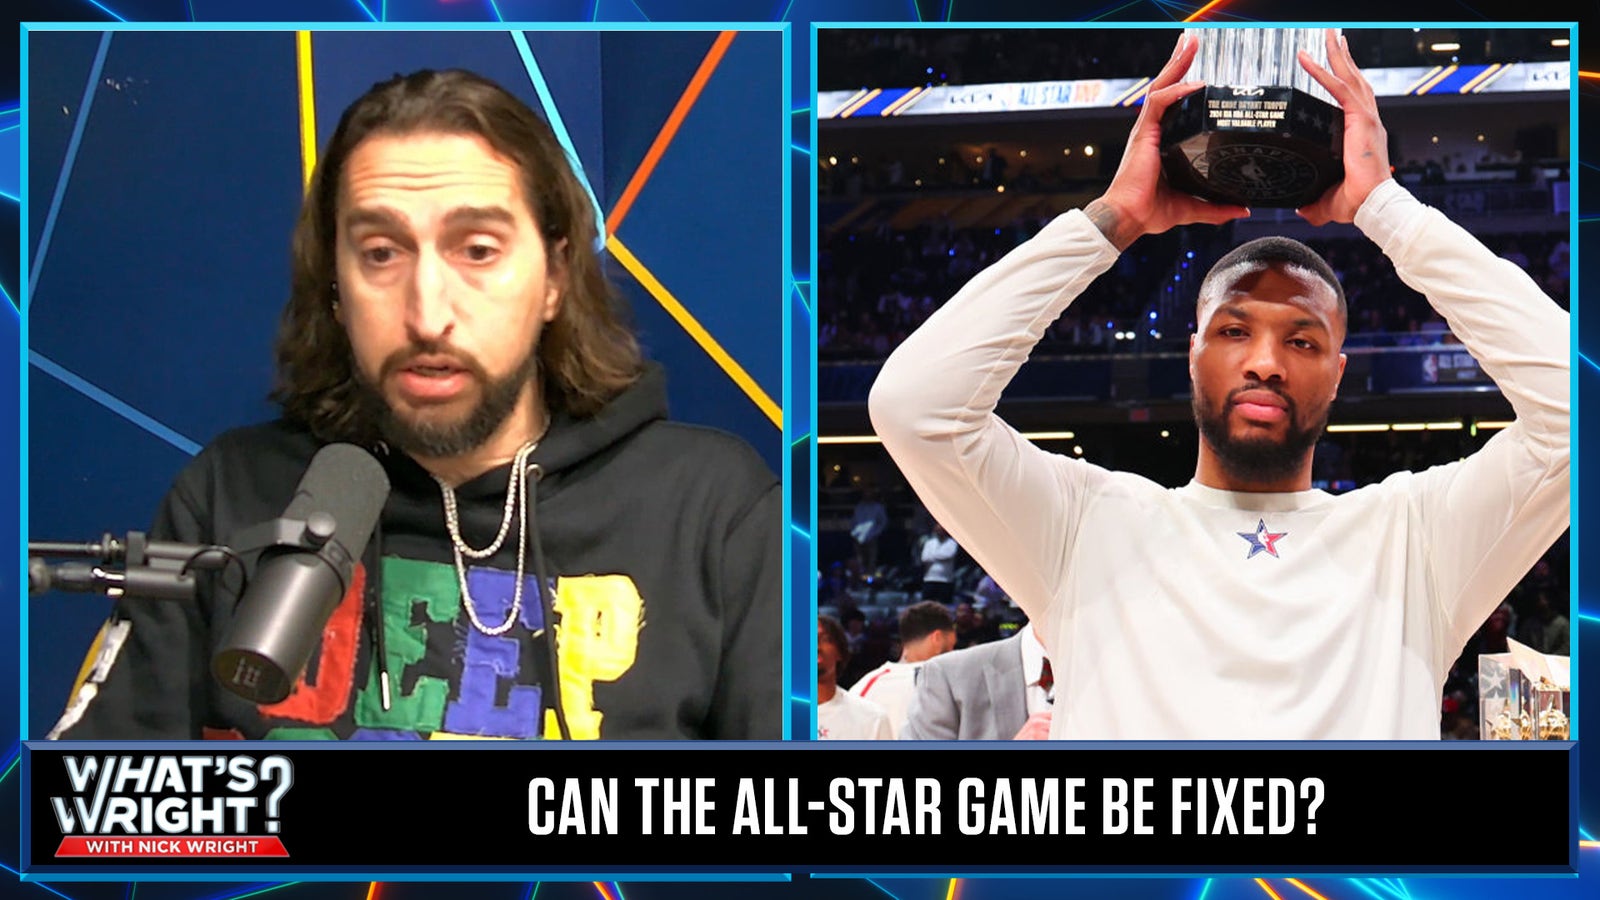 How to fix the NBA All-Star Game? Home court advantage and bigger cash prize 